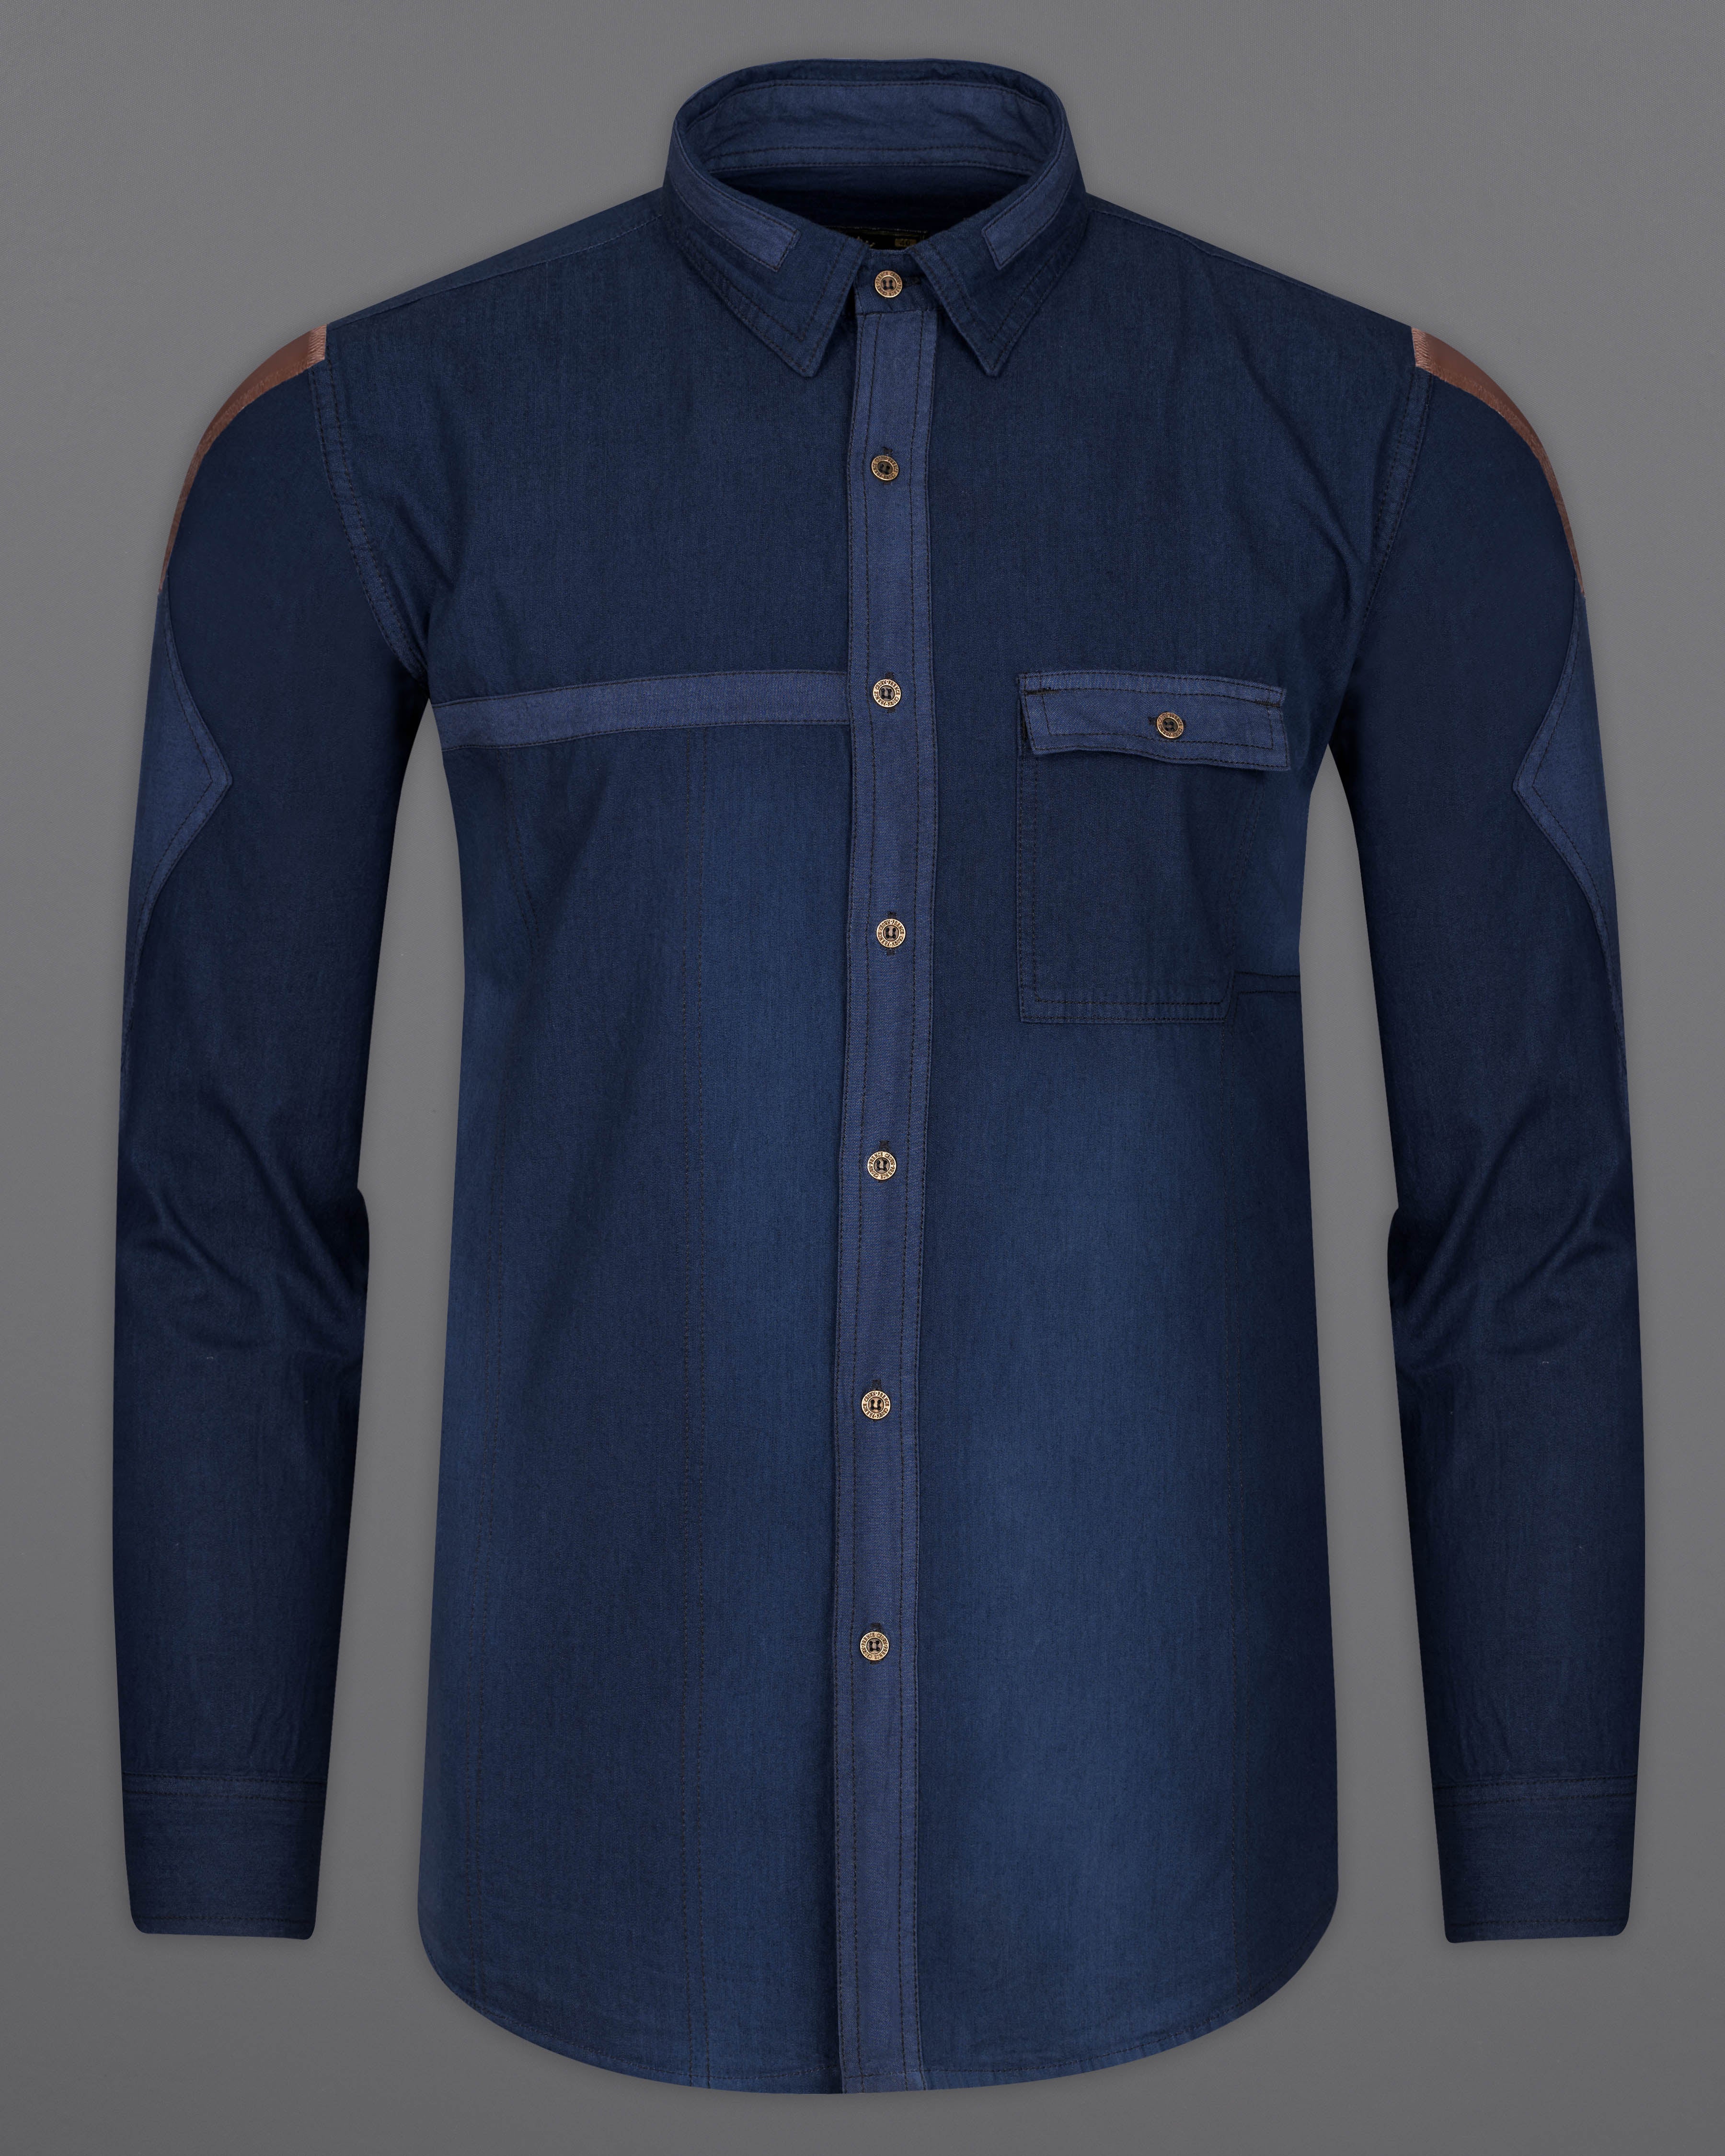 Mirage Blue Chambray Textured Designer Overshirt with Brown Patchwork 9467-MB-38, 9467-MB-H-38, 9467-MB-39, 9467-MB-H-39, 9467-MB-40, 9467-MB-H-40, 9467-MB-42, 9467-MB-H-42, 9467-MB-44, 9467-MB-H-44, 9467-MB-46, 9467-MB-H-46, 9467-MB-48, 9467-MB-H-48, 9467-MB-50, 9467-MB-H-50, 9467-MB-52, 9467-MB-H-52